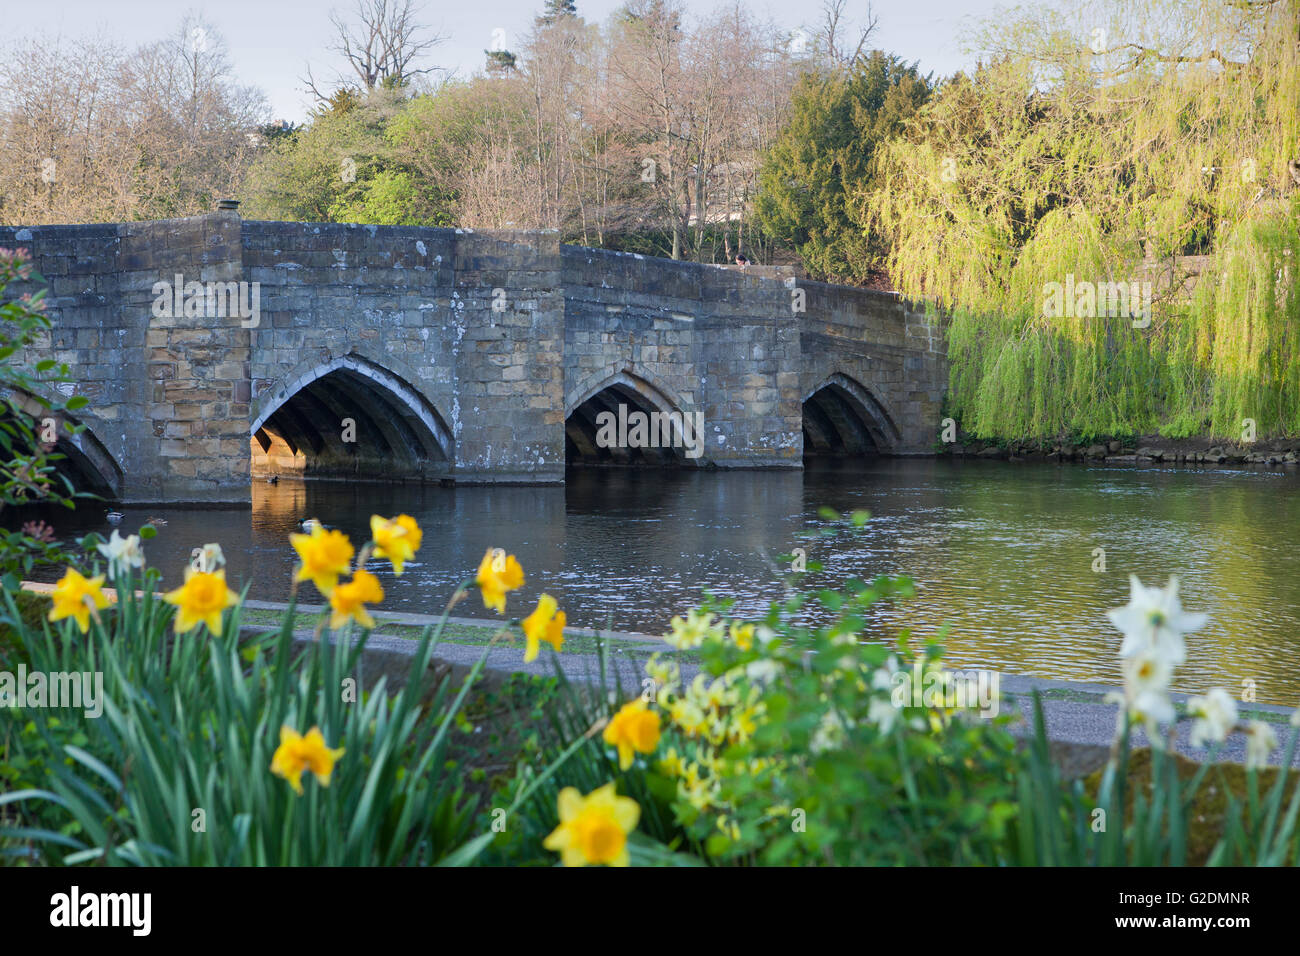 The ancient (12th Century) Road Bridge which spans the River Wye at Bakewell, Derbyshire. Stock Photo